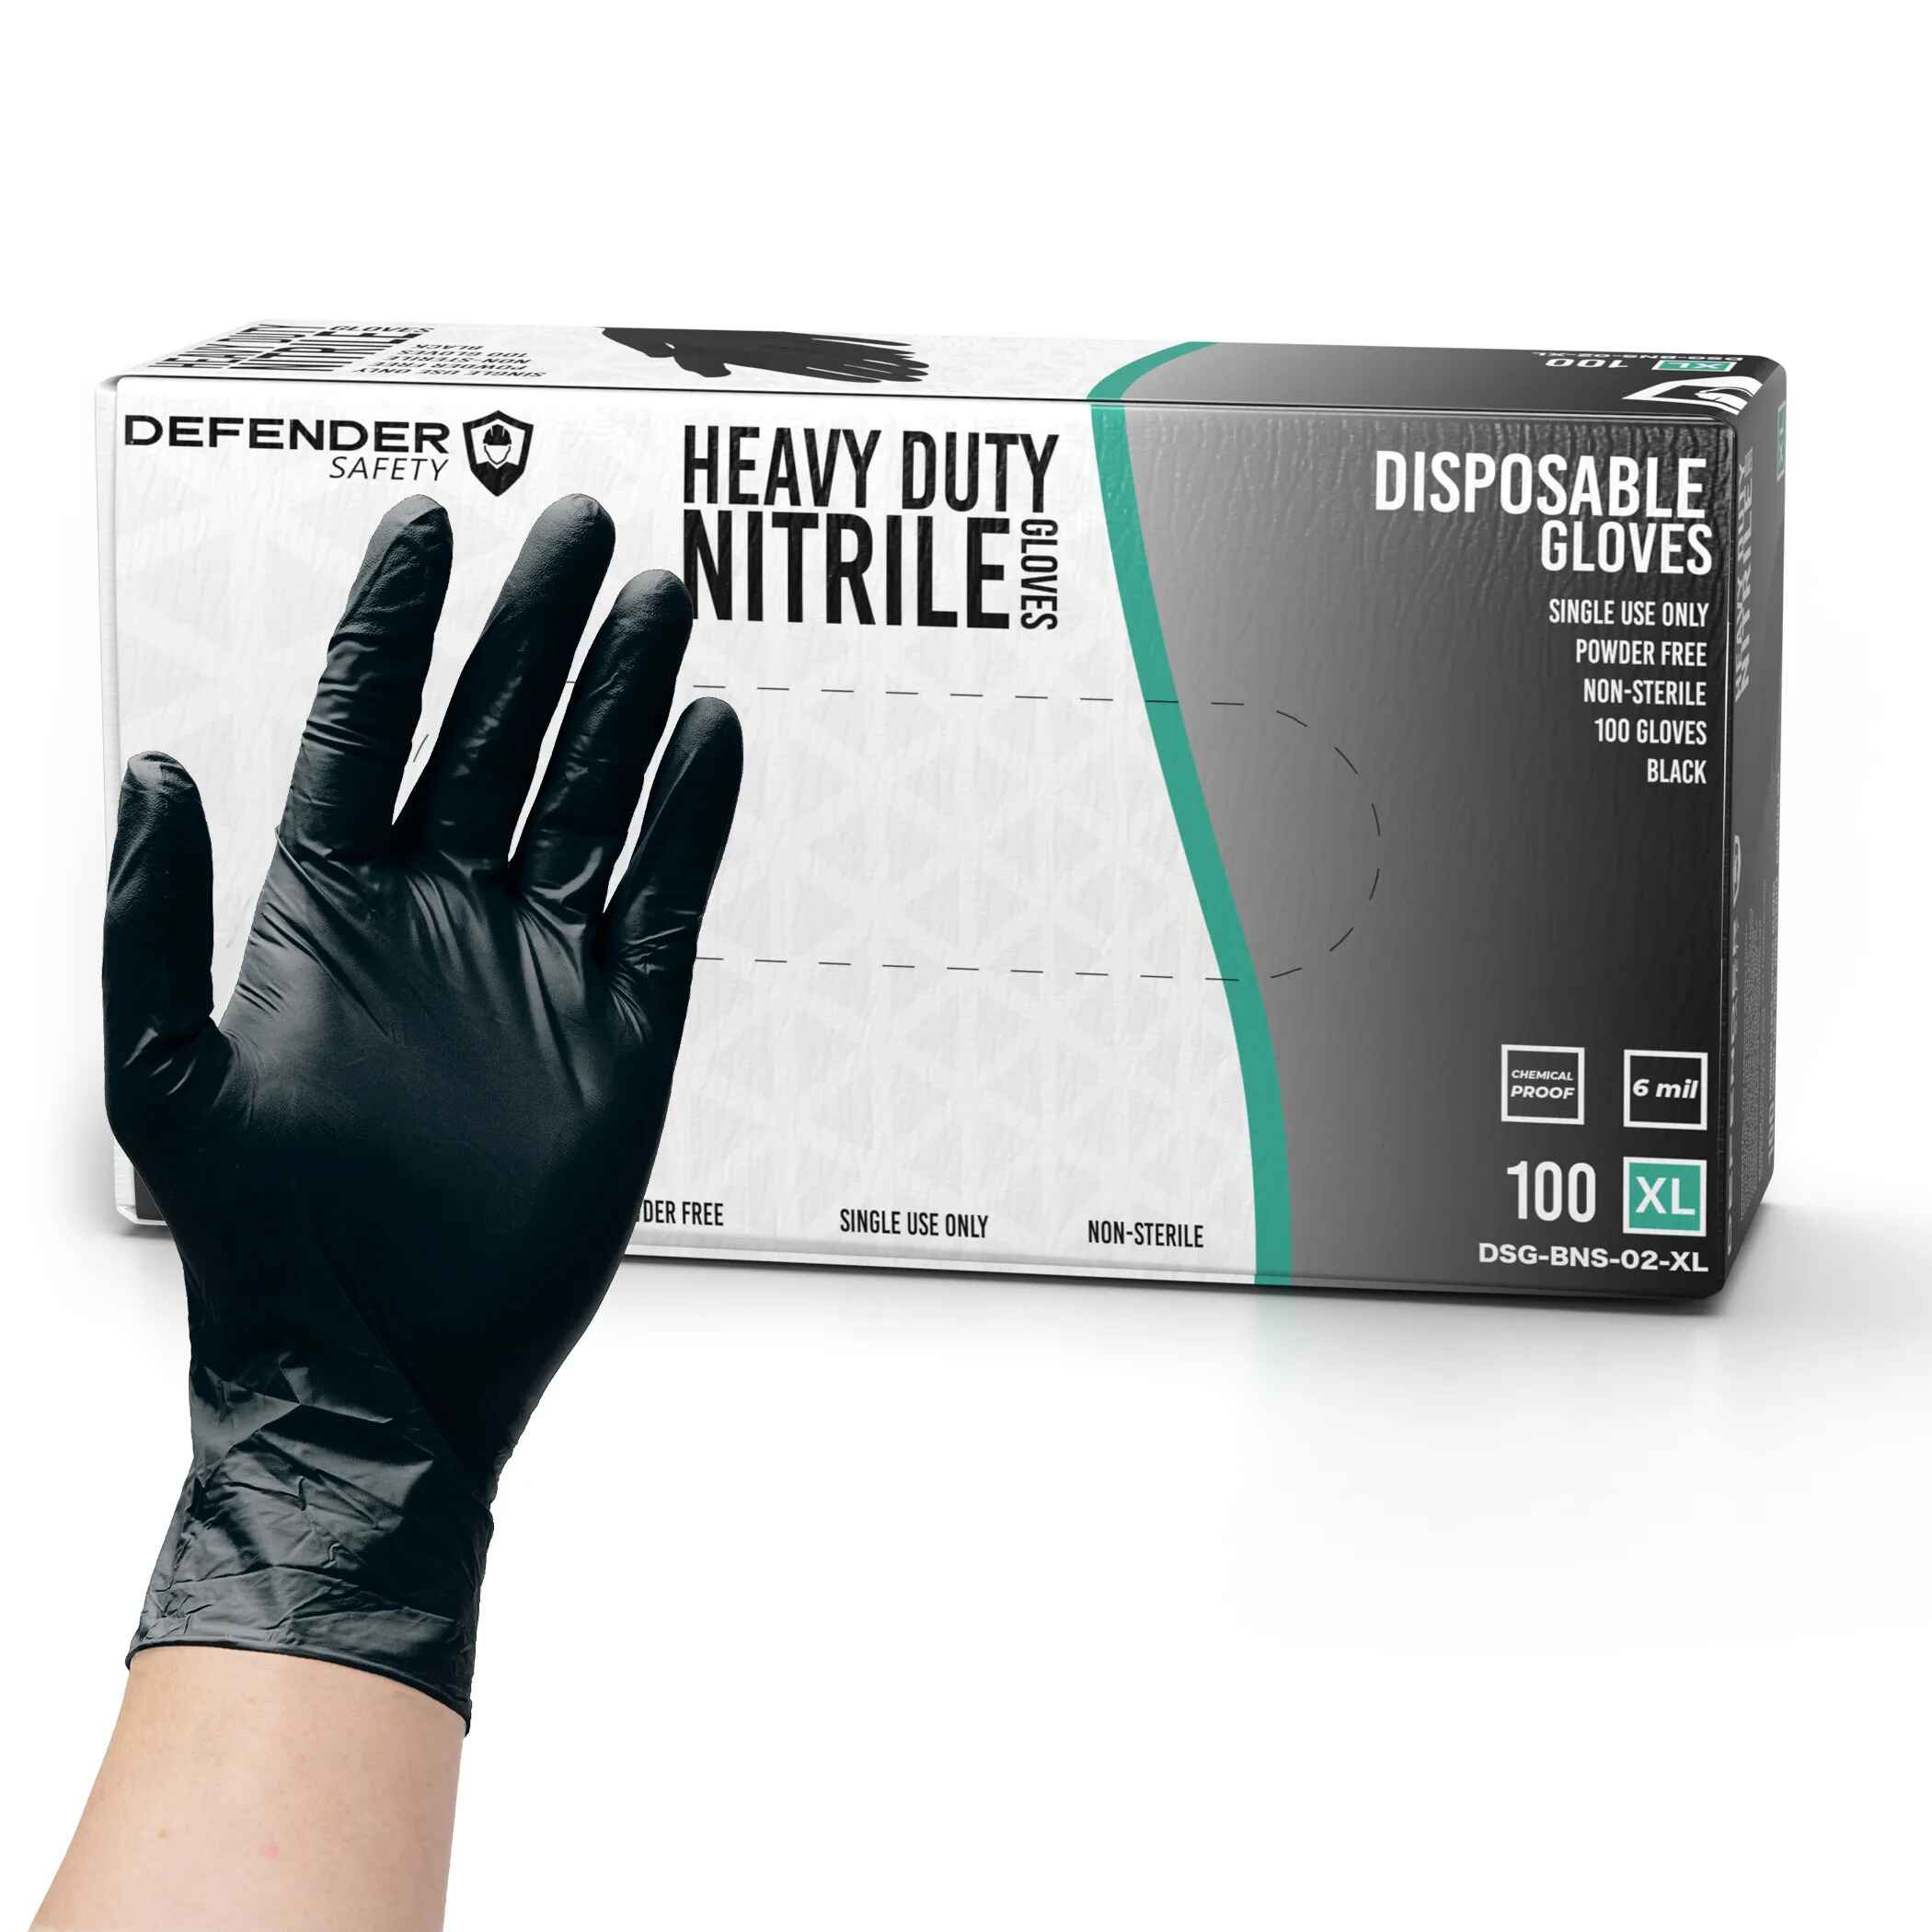 6 Nitrile Gloves, Heavy Duty, Chemical Resistant, Powder Fre